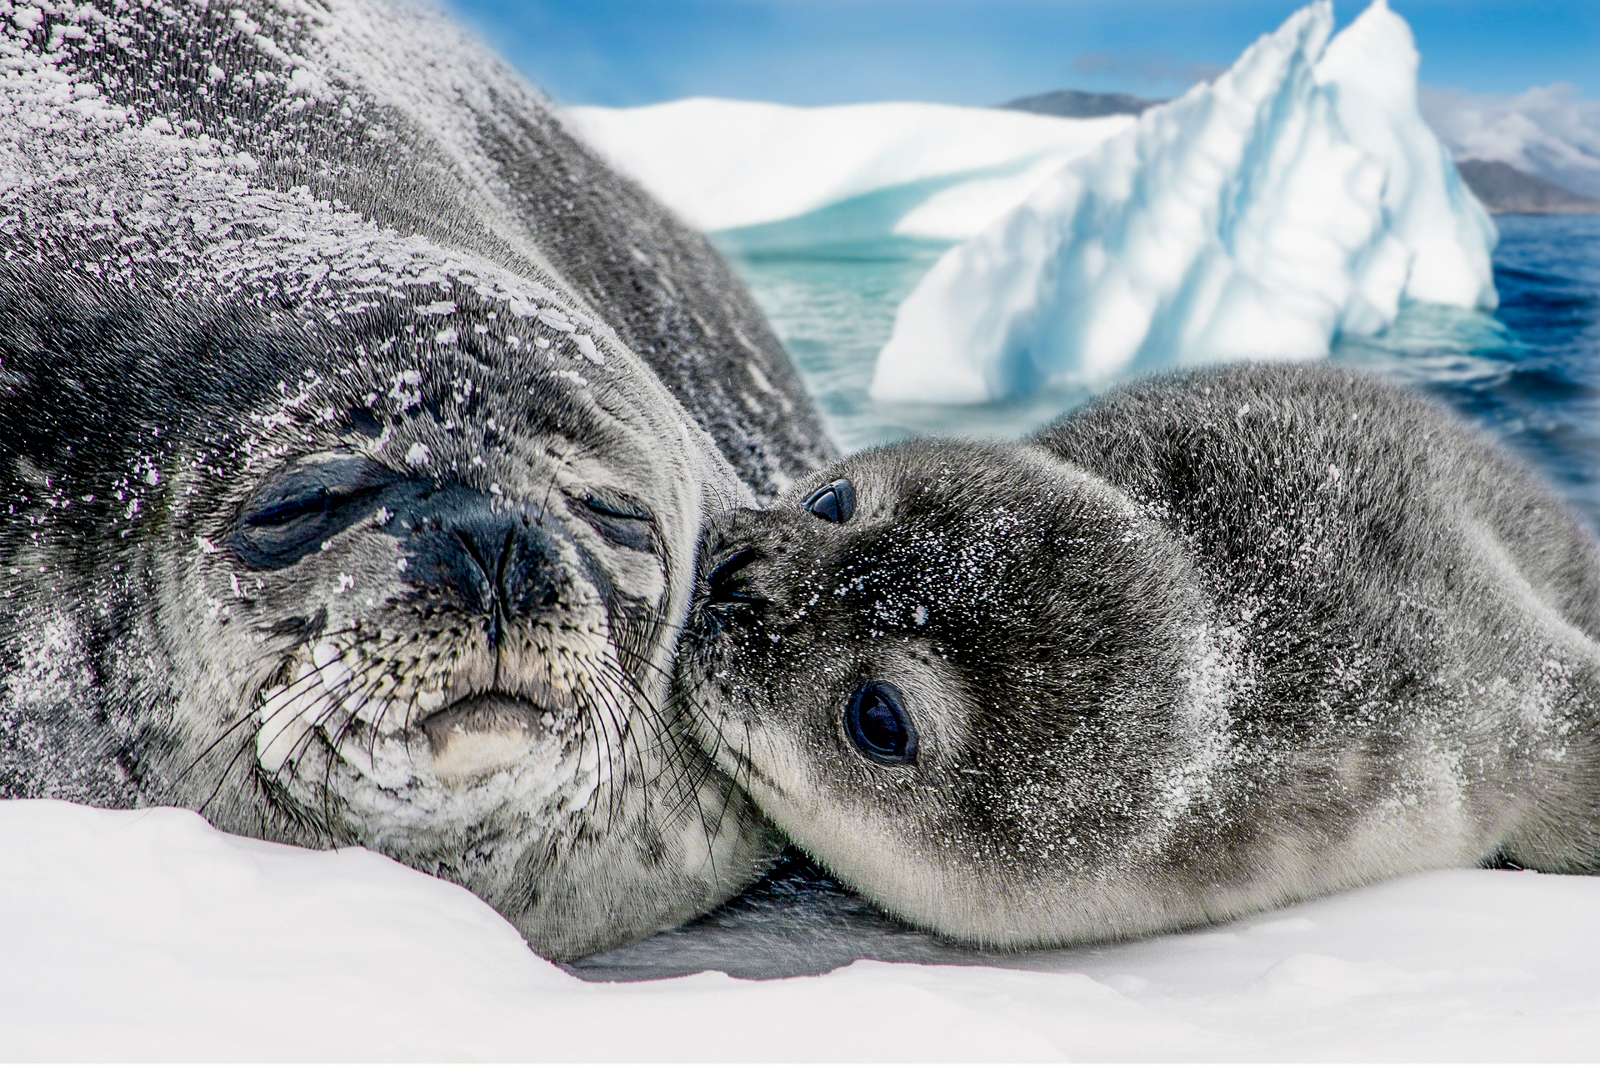 A seal pup and its mother spotted in the Arctic